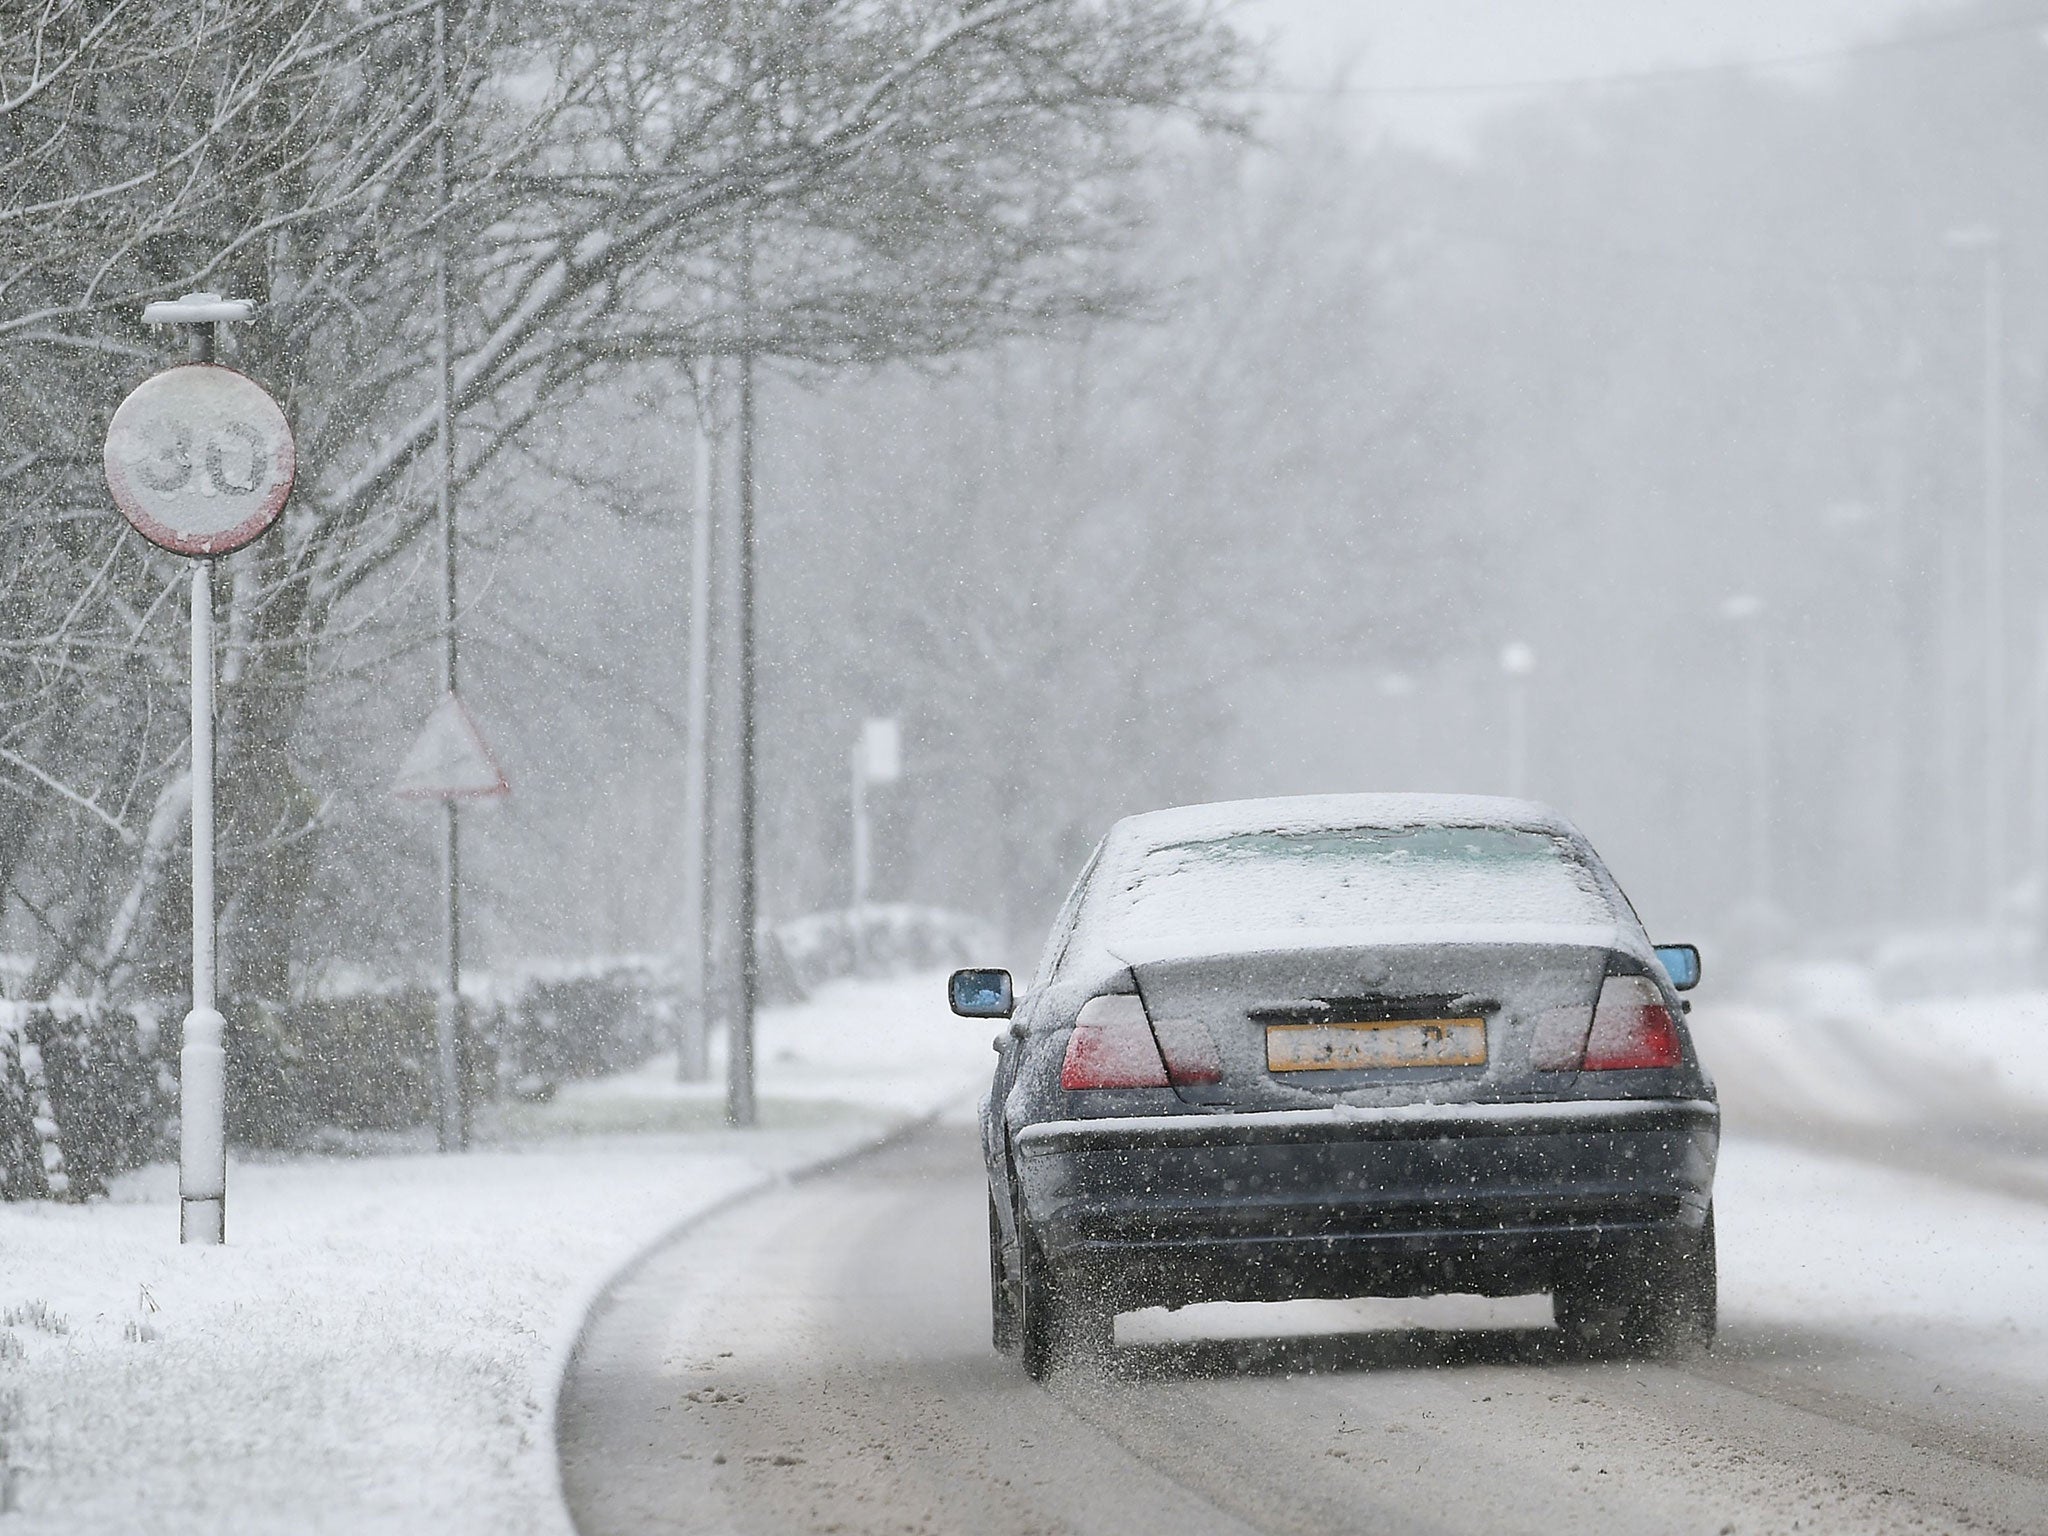 A car makes its way through sleet and snow in Buxton, Derbyshire, on Sunday 22 February